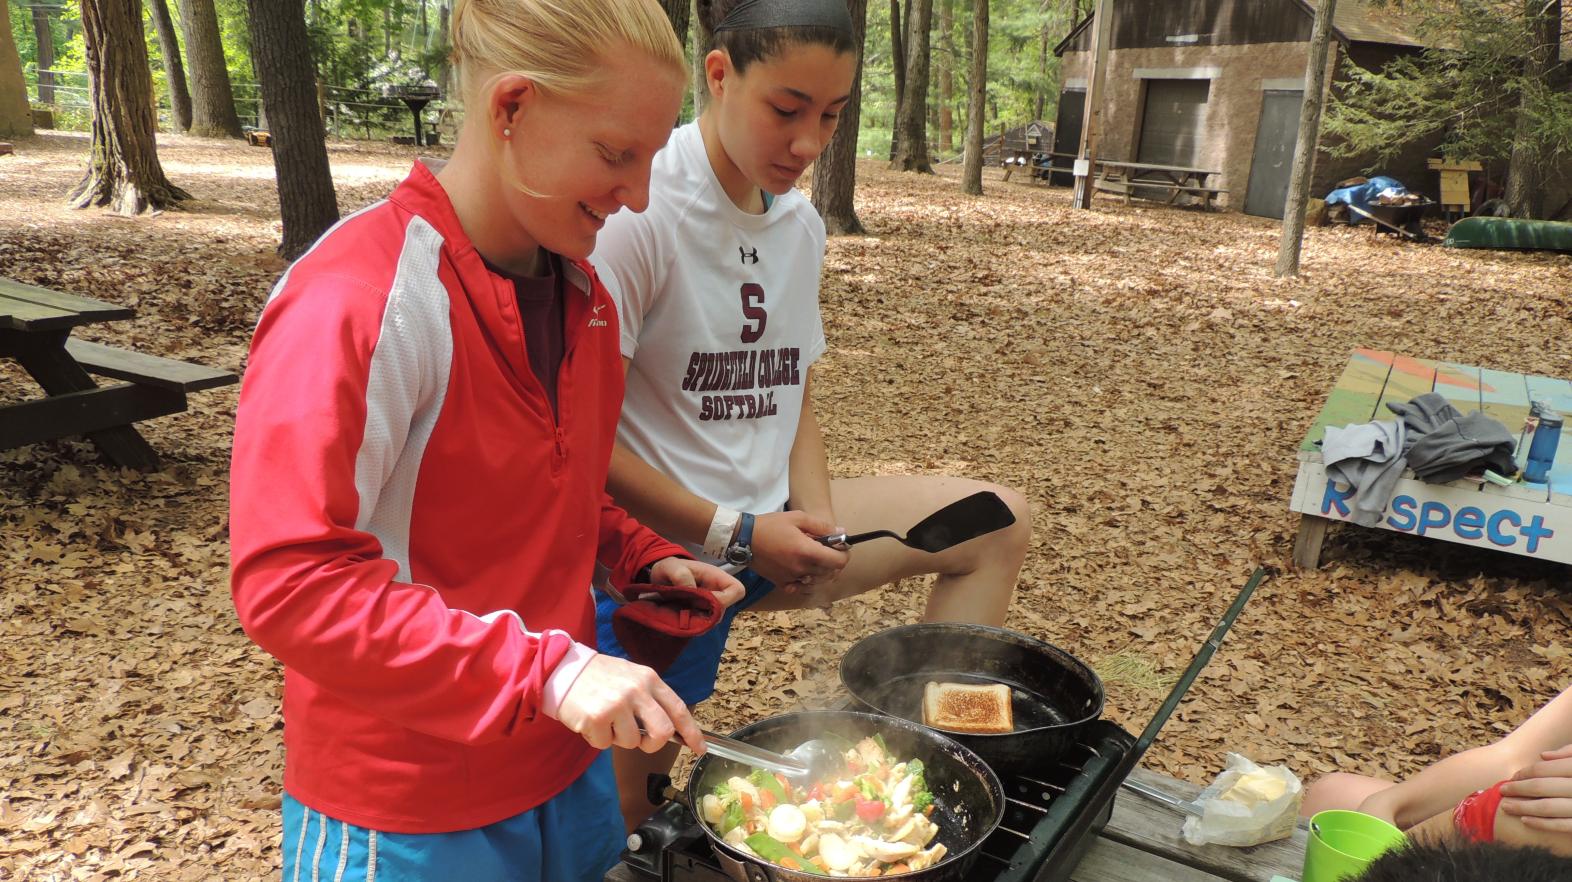 Students learn to cook and prepare their own meals during Outdoor Pursuits at Springfield College